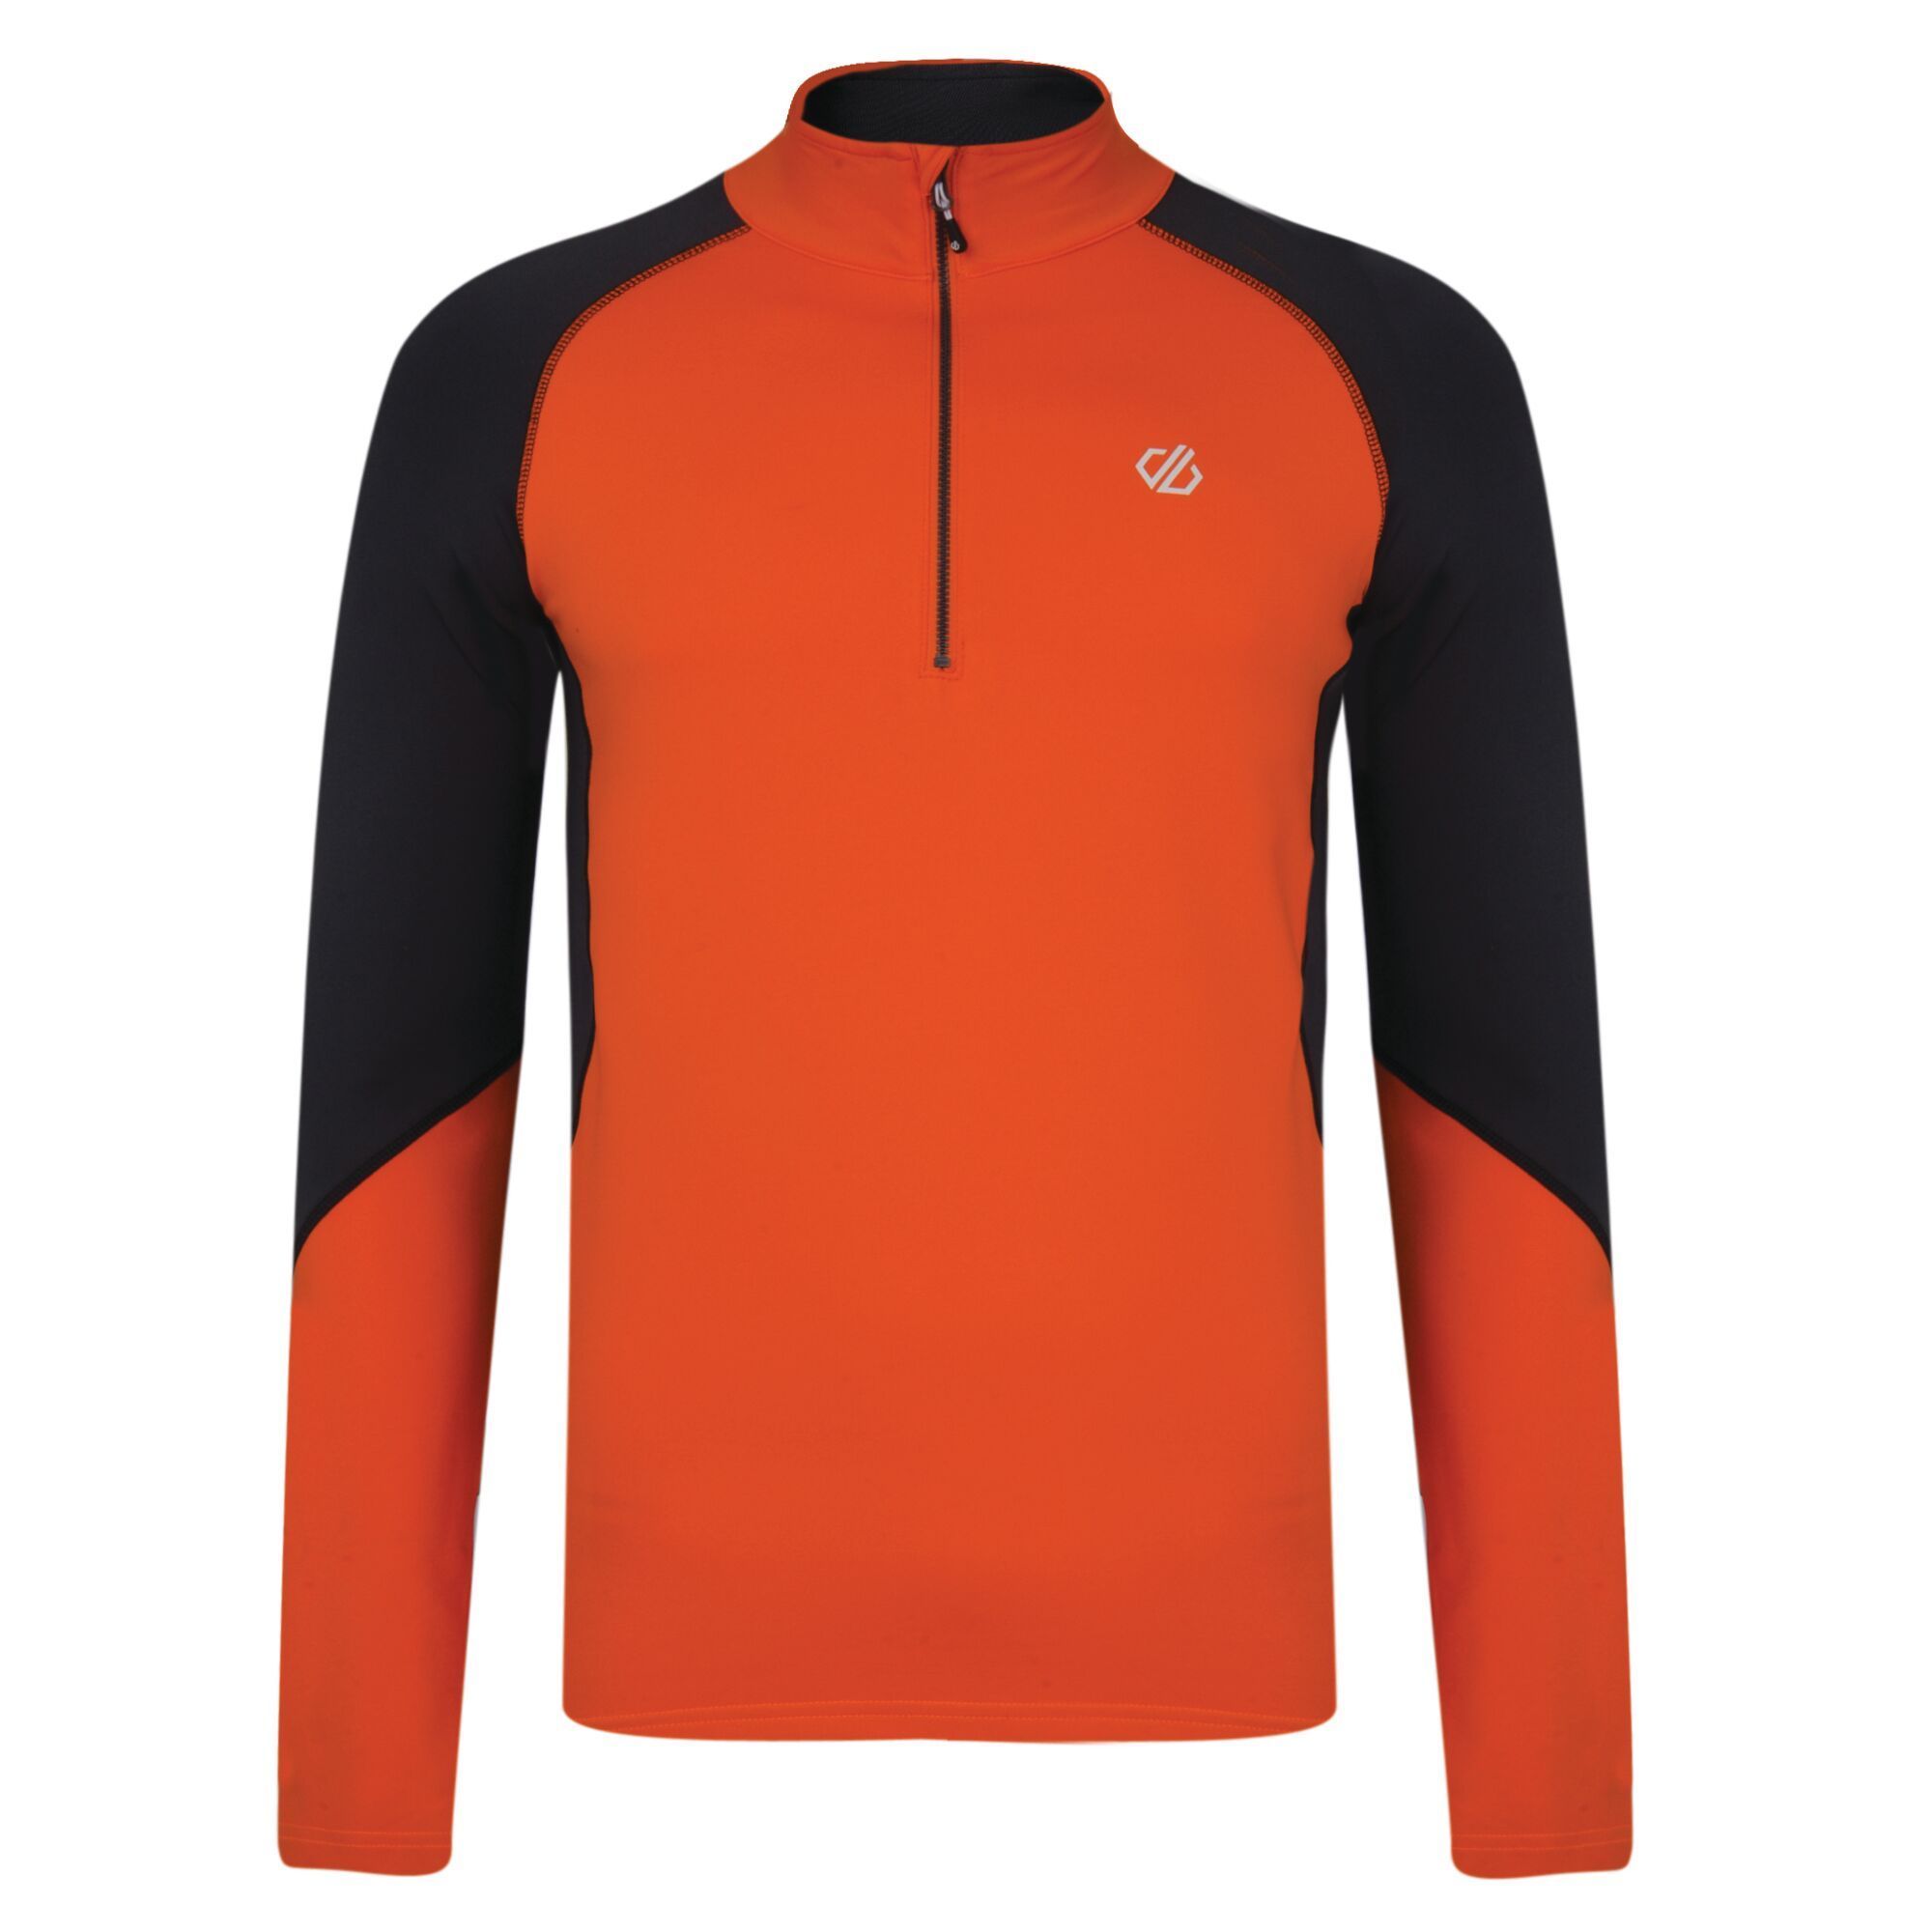 Elastane 3% & polyester 97%. Lightweight Ilus Core warm backed knitted stretch fabric. Quick drying. Half length zip with inner zip and chin guard.